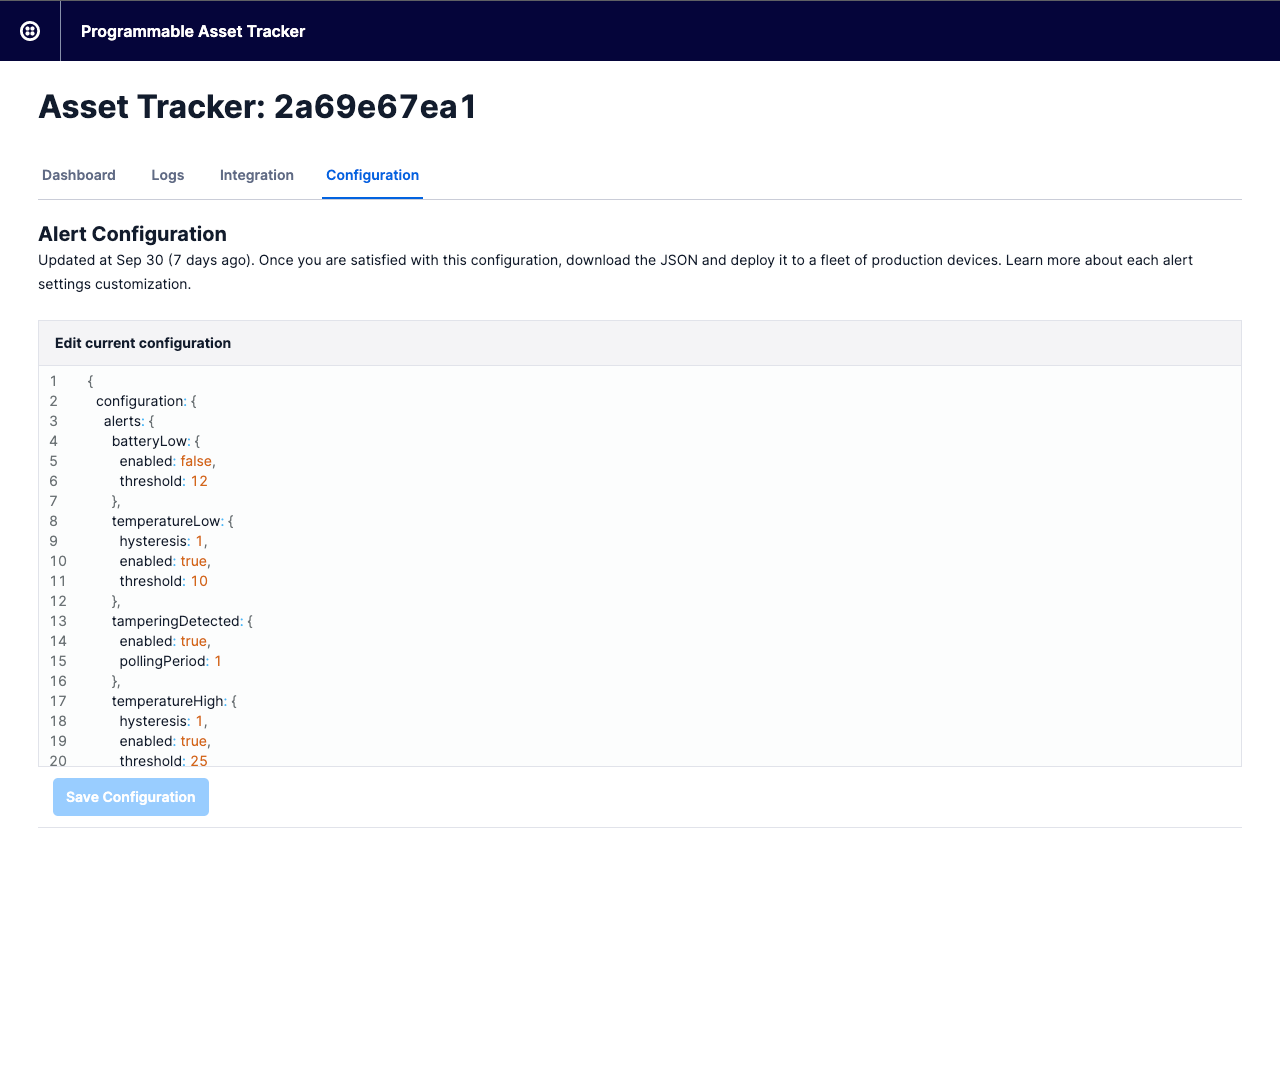 The Twilio Programmable Asset Tracker UI's configuration view.